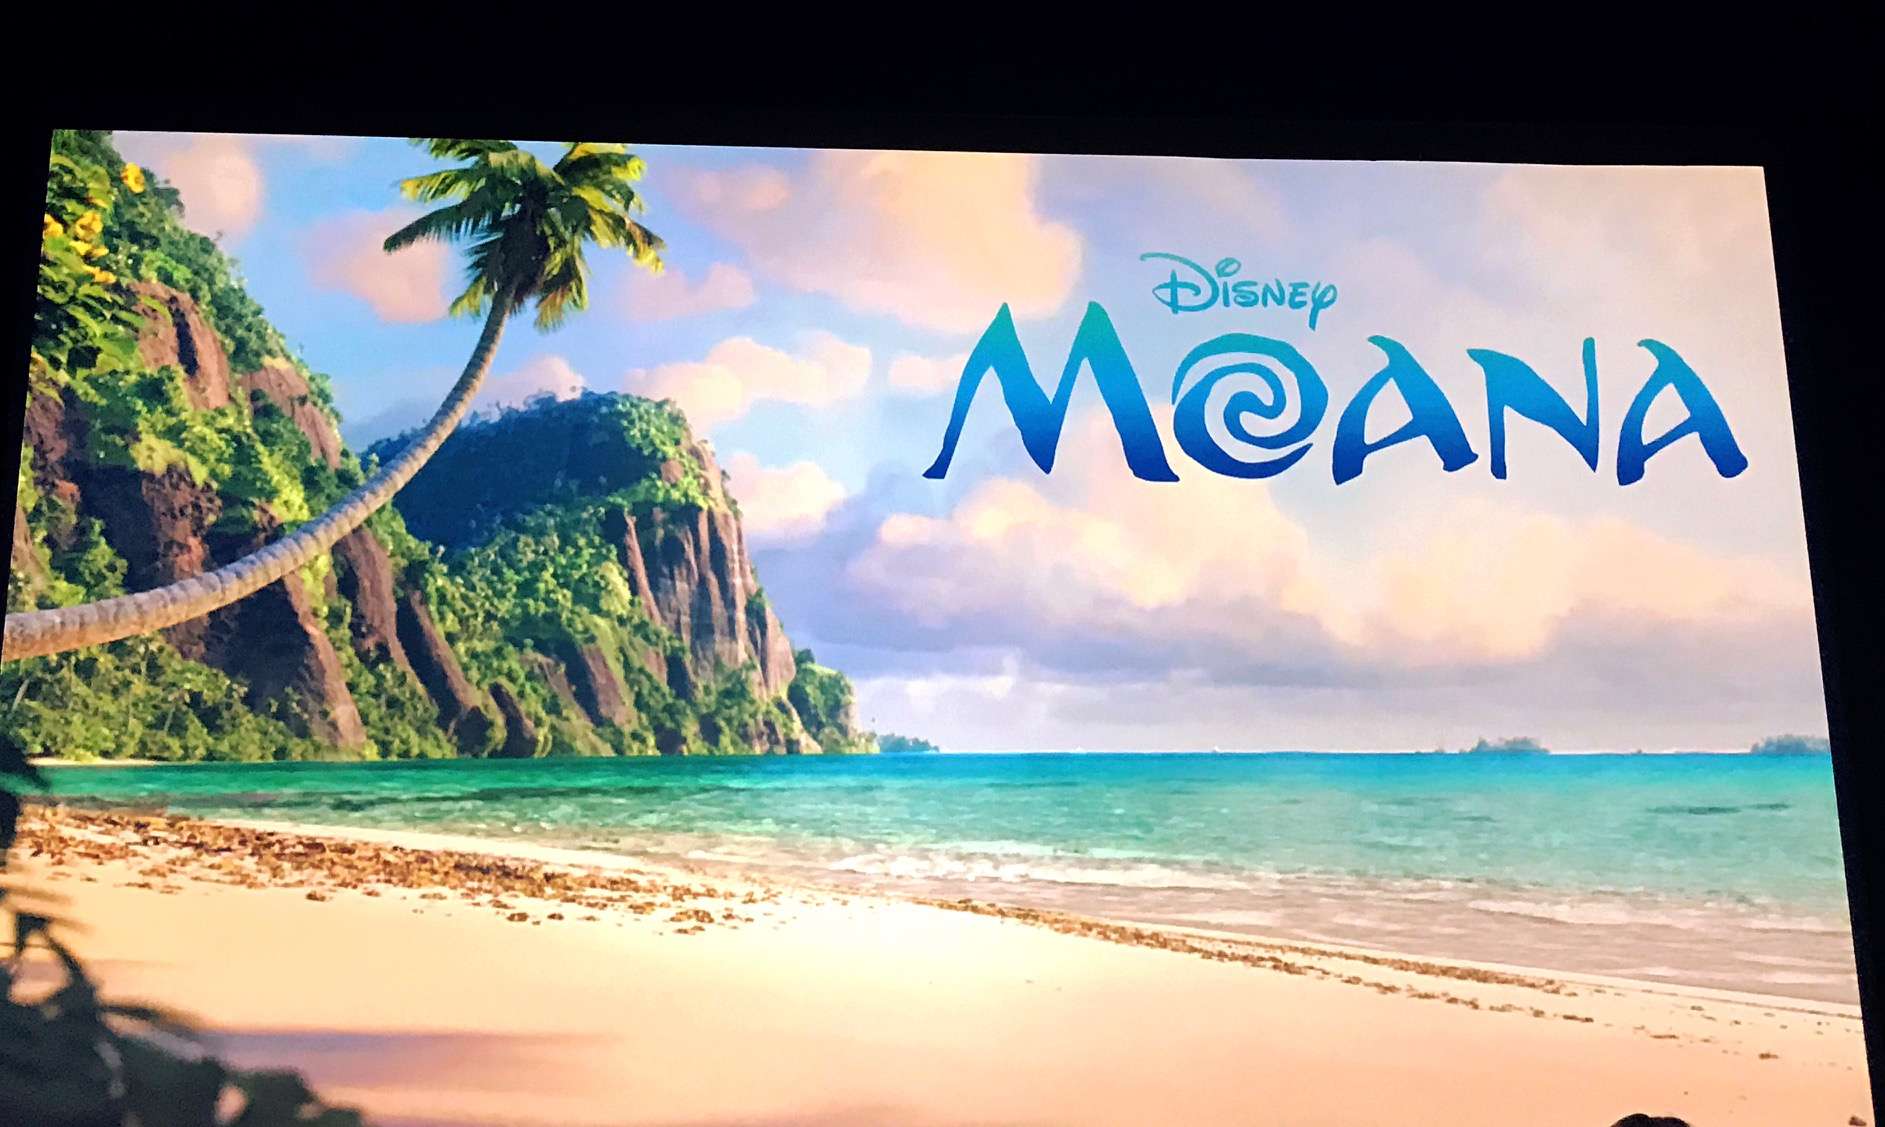 A special presentation on the making of Moana and celebrating the culture of the islands.